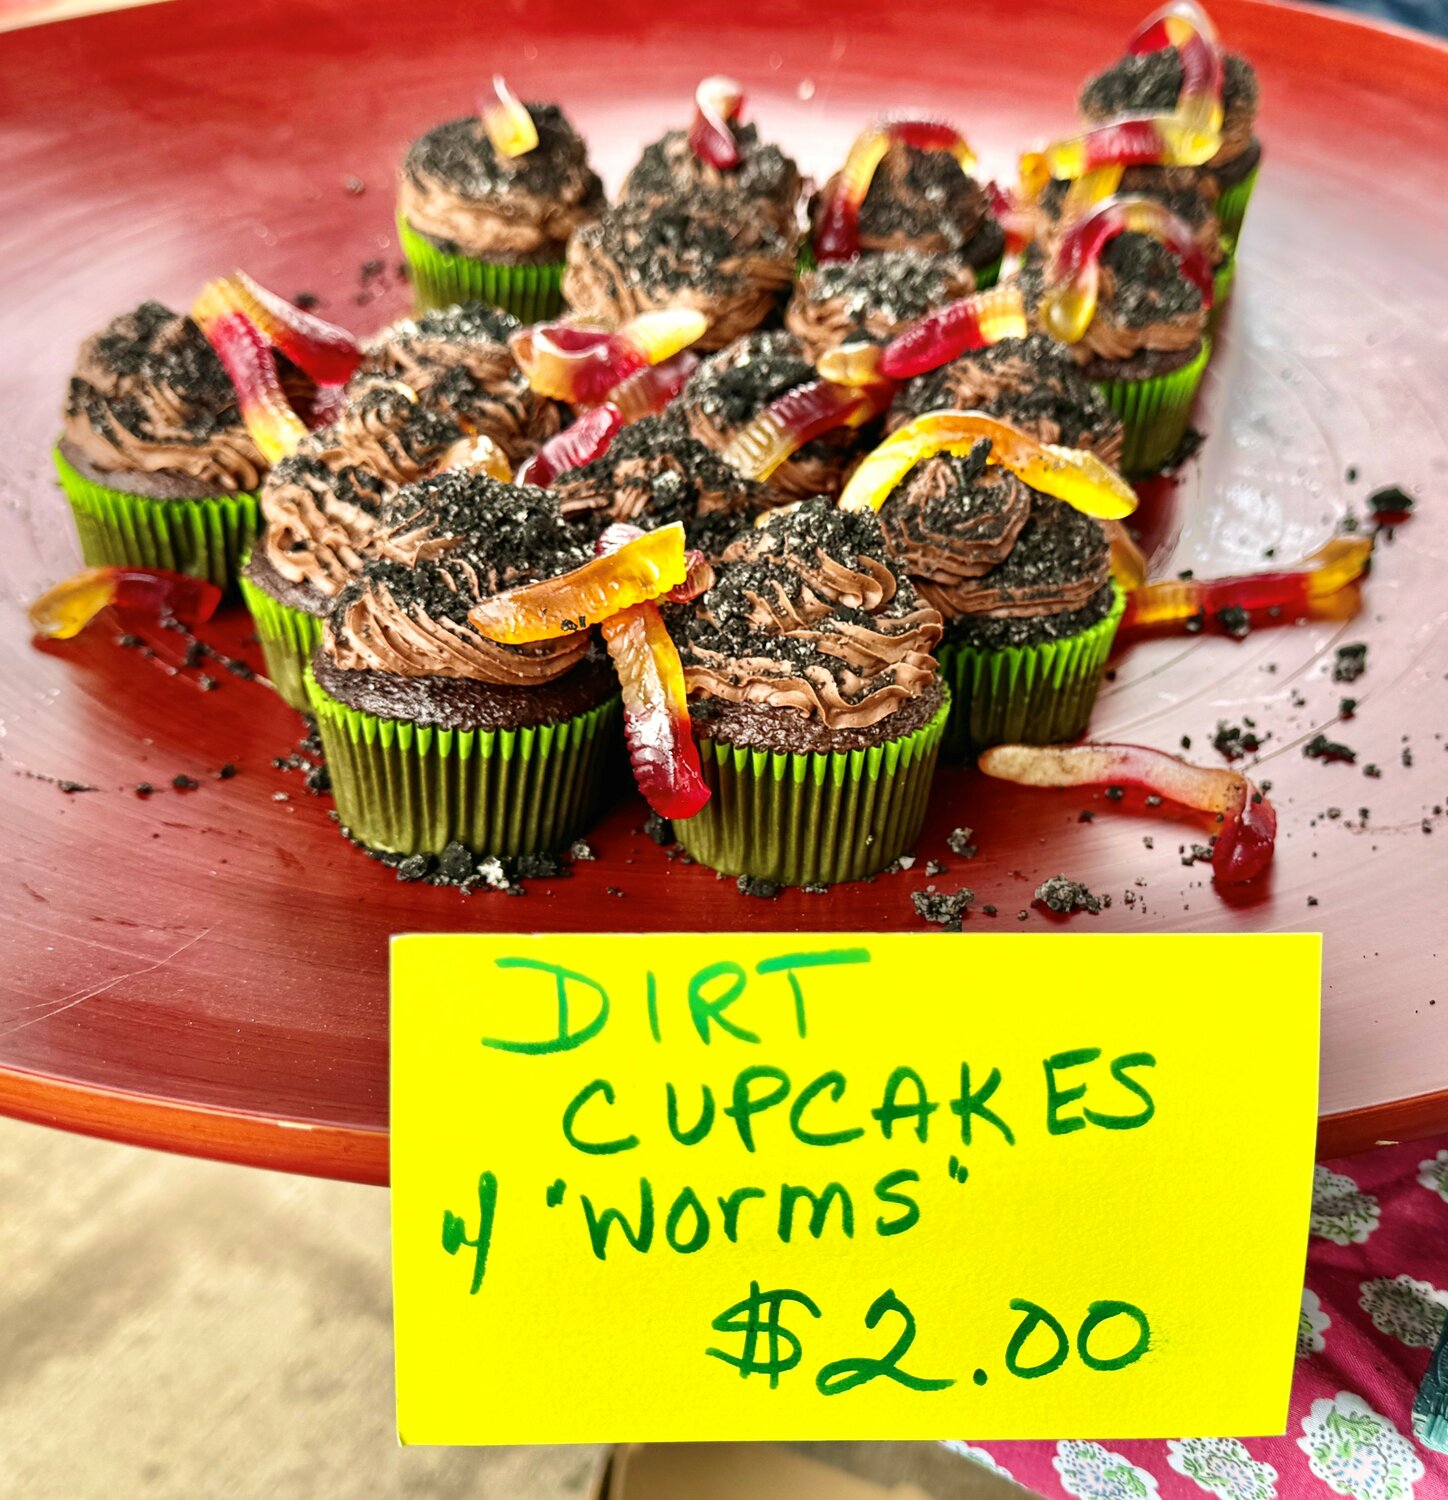 The Tinicum Earth Day Fair featured the sale of “Dirt Cupcakes w/ ‘Worms,’ of the gummy variety.